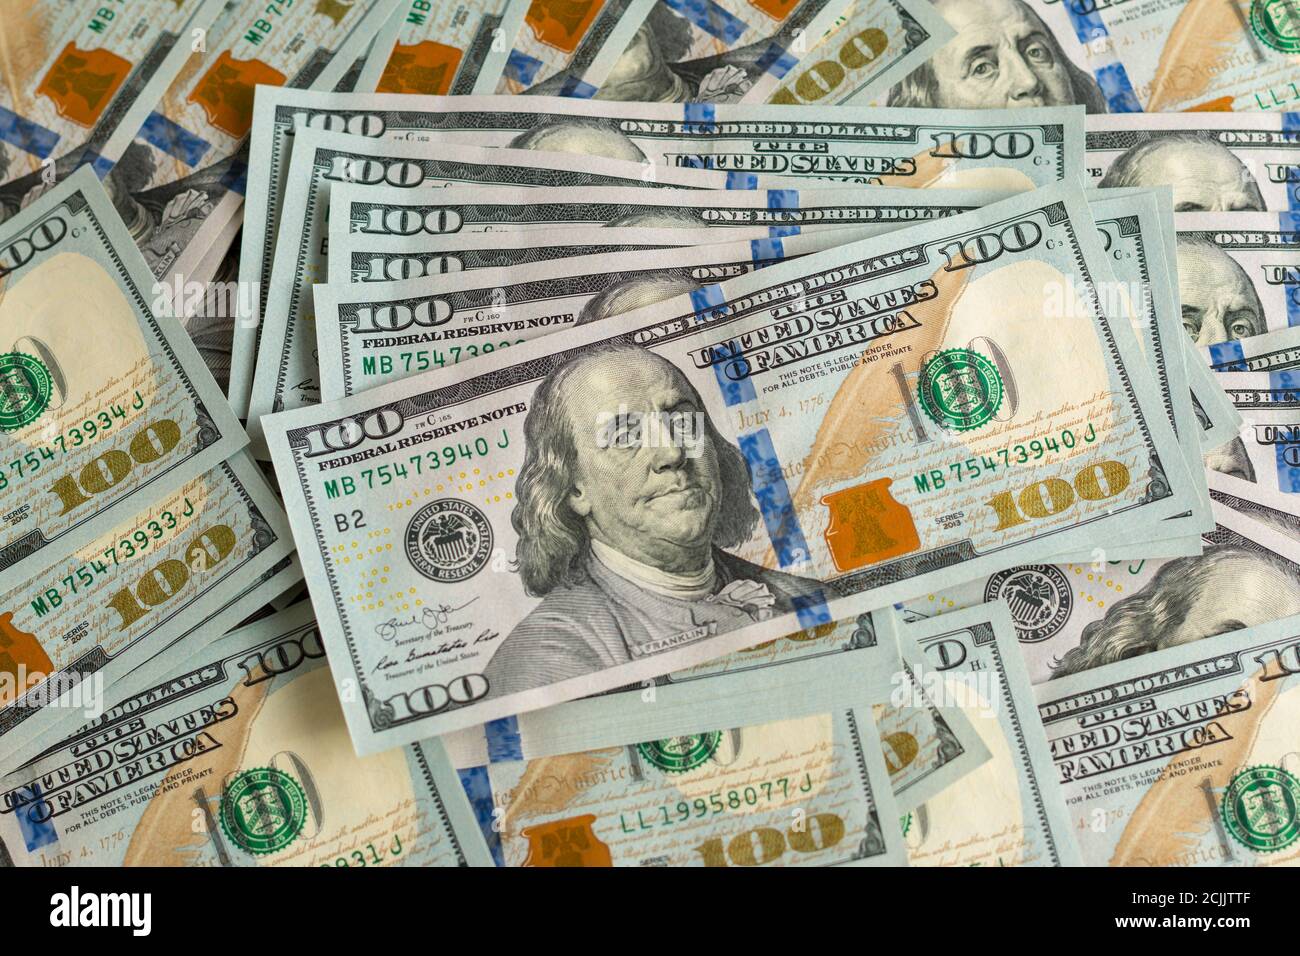 background with a lot of 100 dollar bills Stock Photo